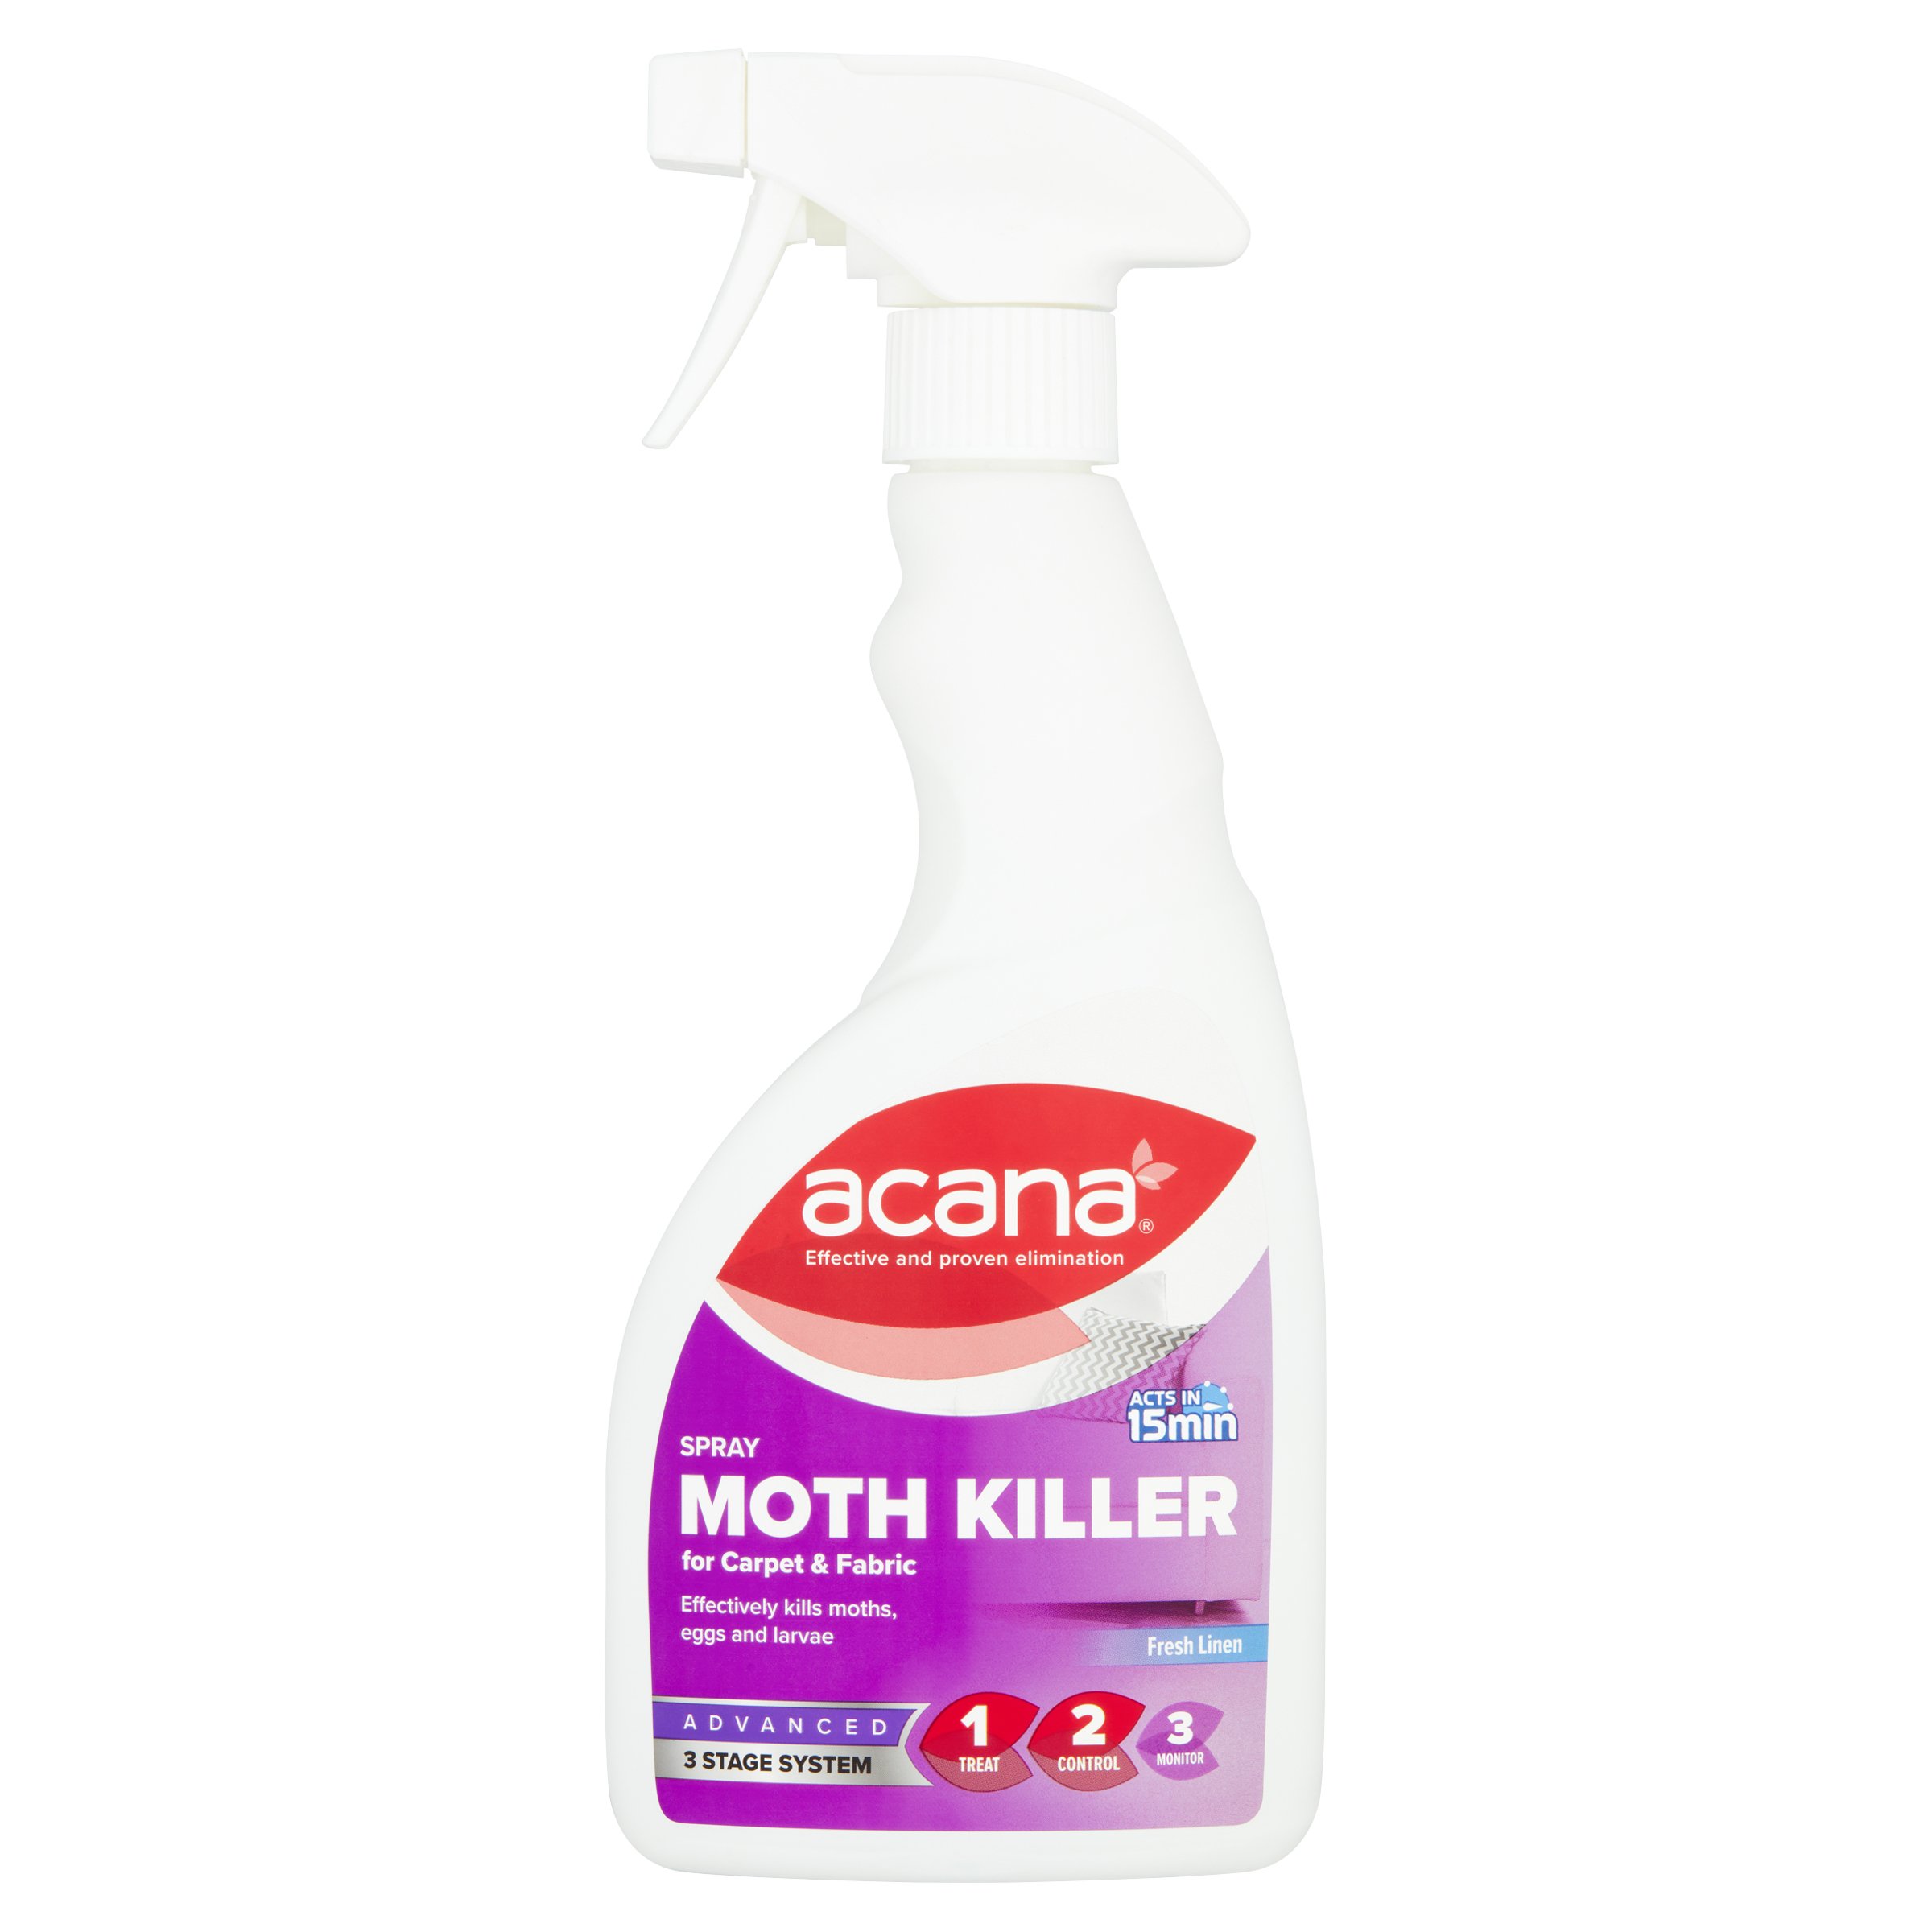  The Proven Product Range For Moth Control